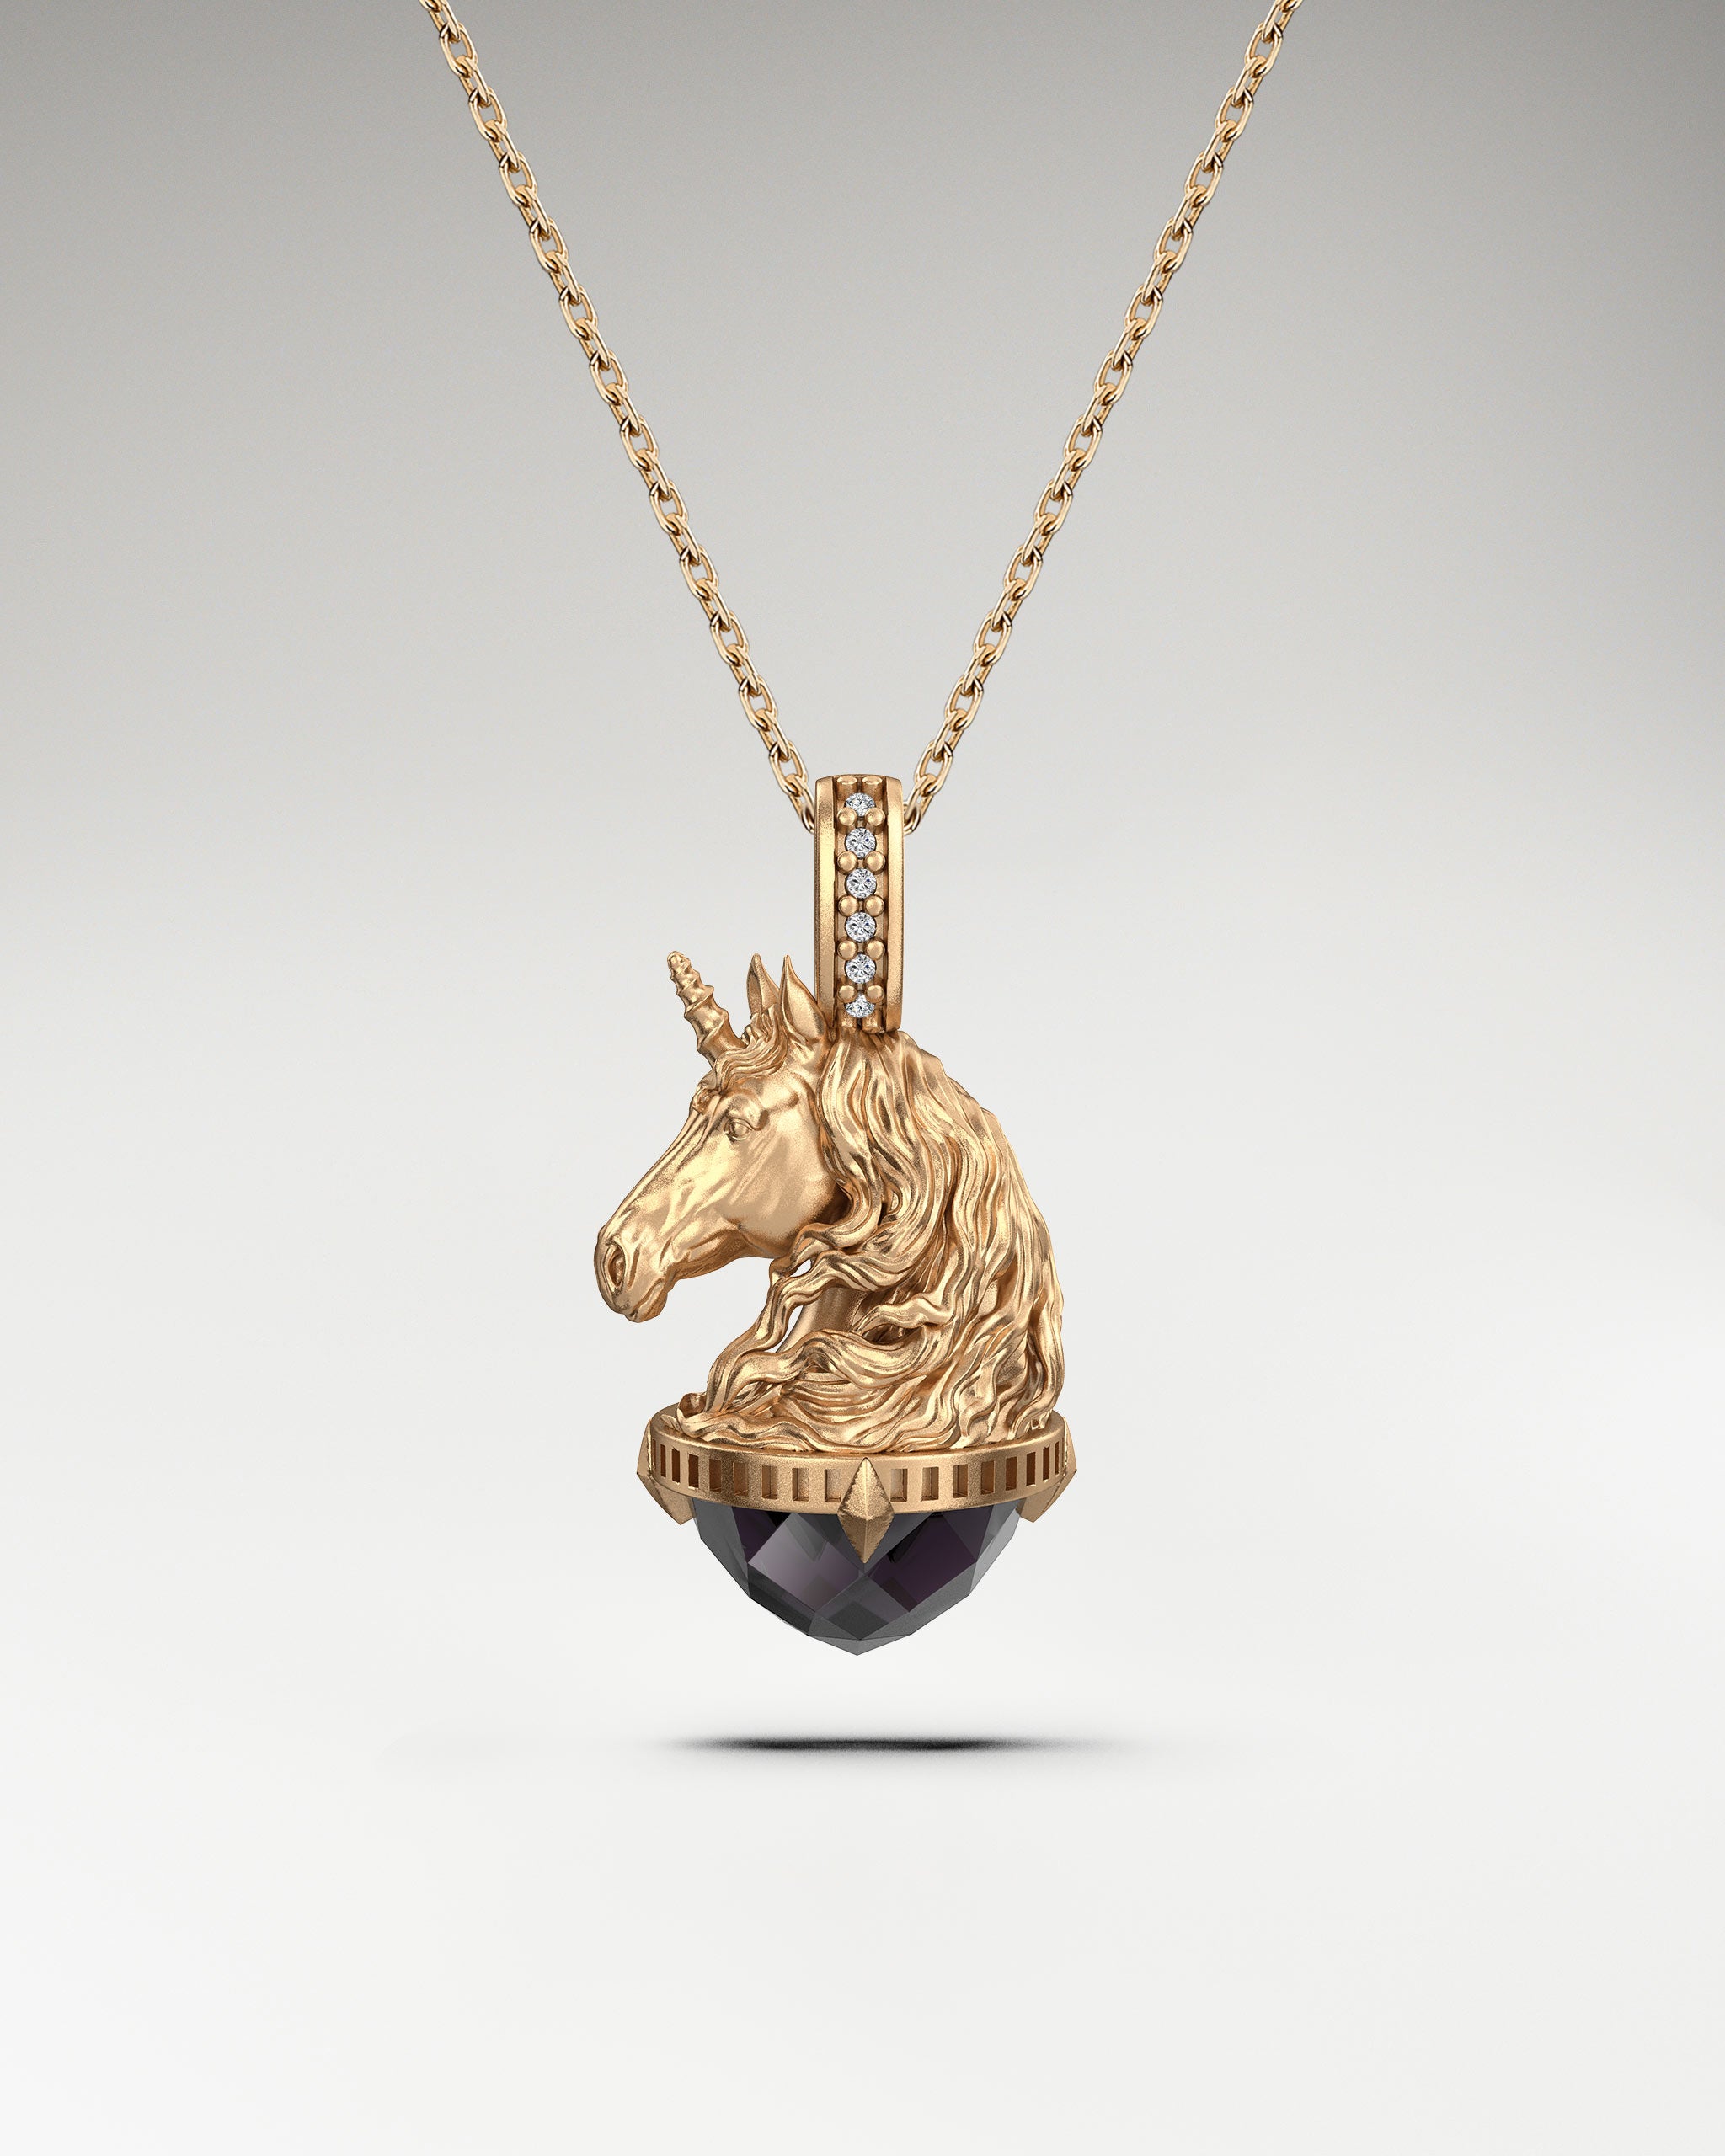 Horse Head Sculpture Pendant with Diamonds and Spinel gemstone